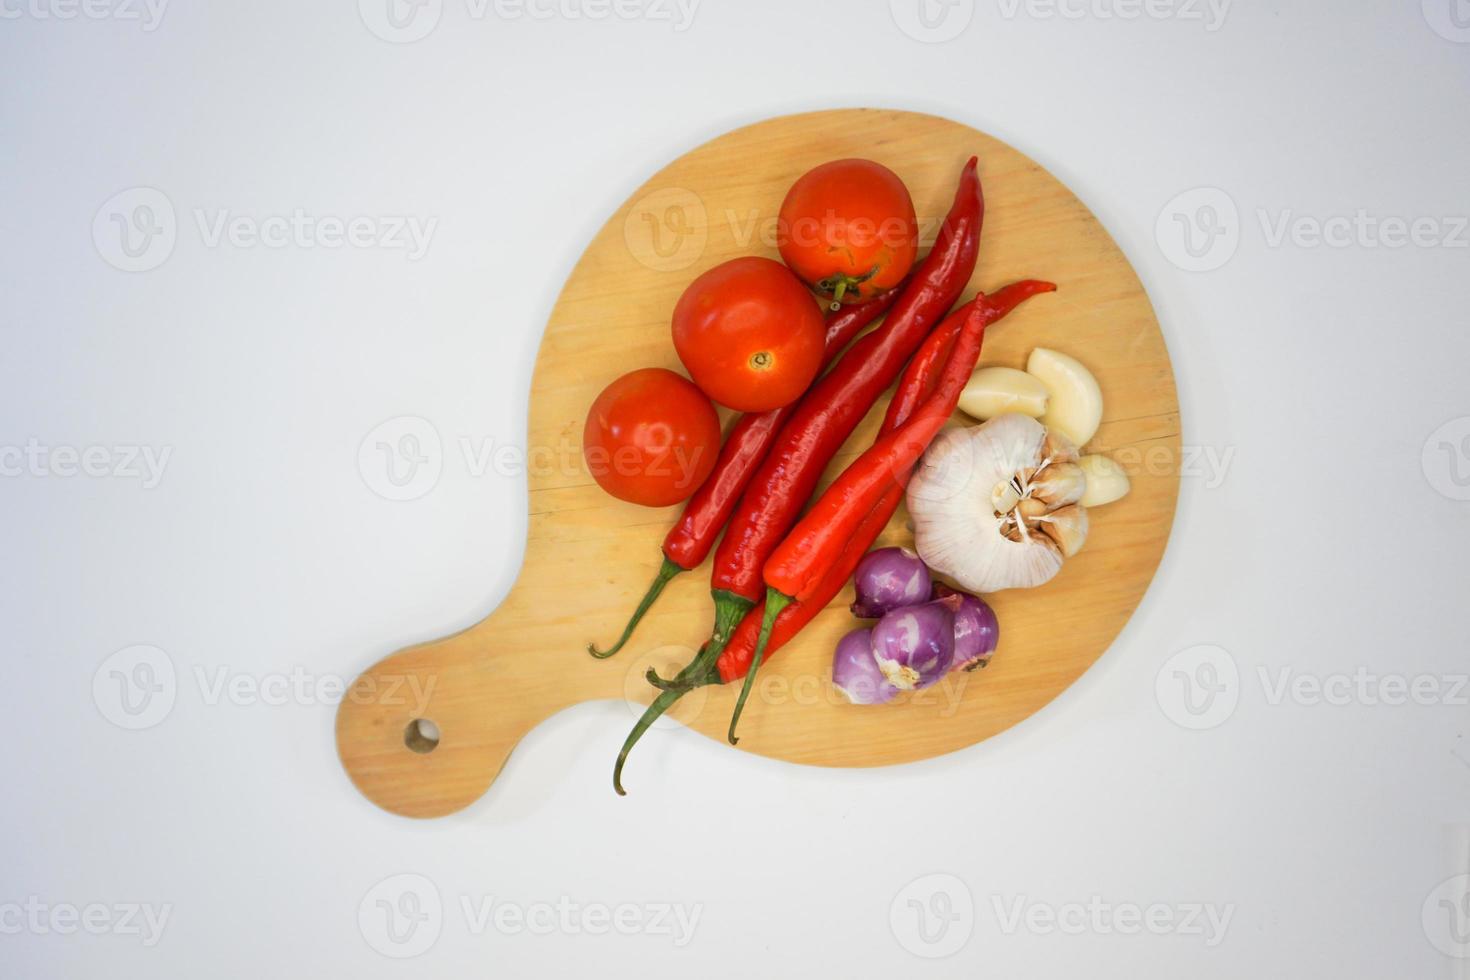 Garlic, Chili, red onion and tomatoes on a wooden plate, top angle shot. photo